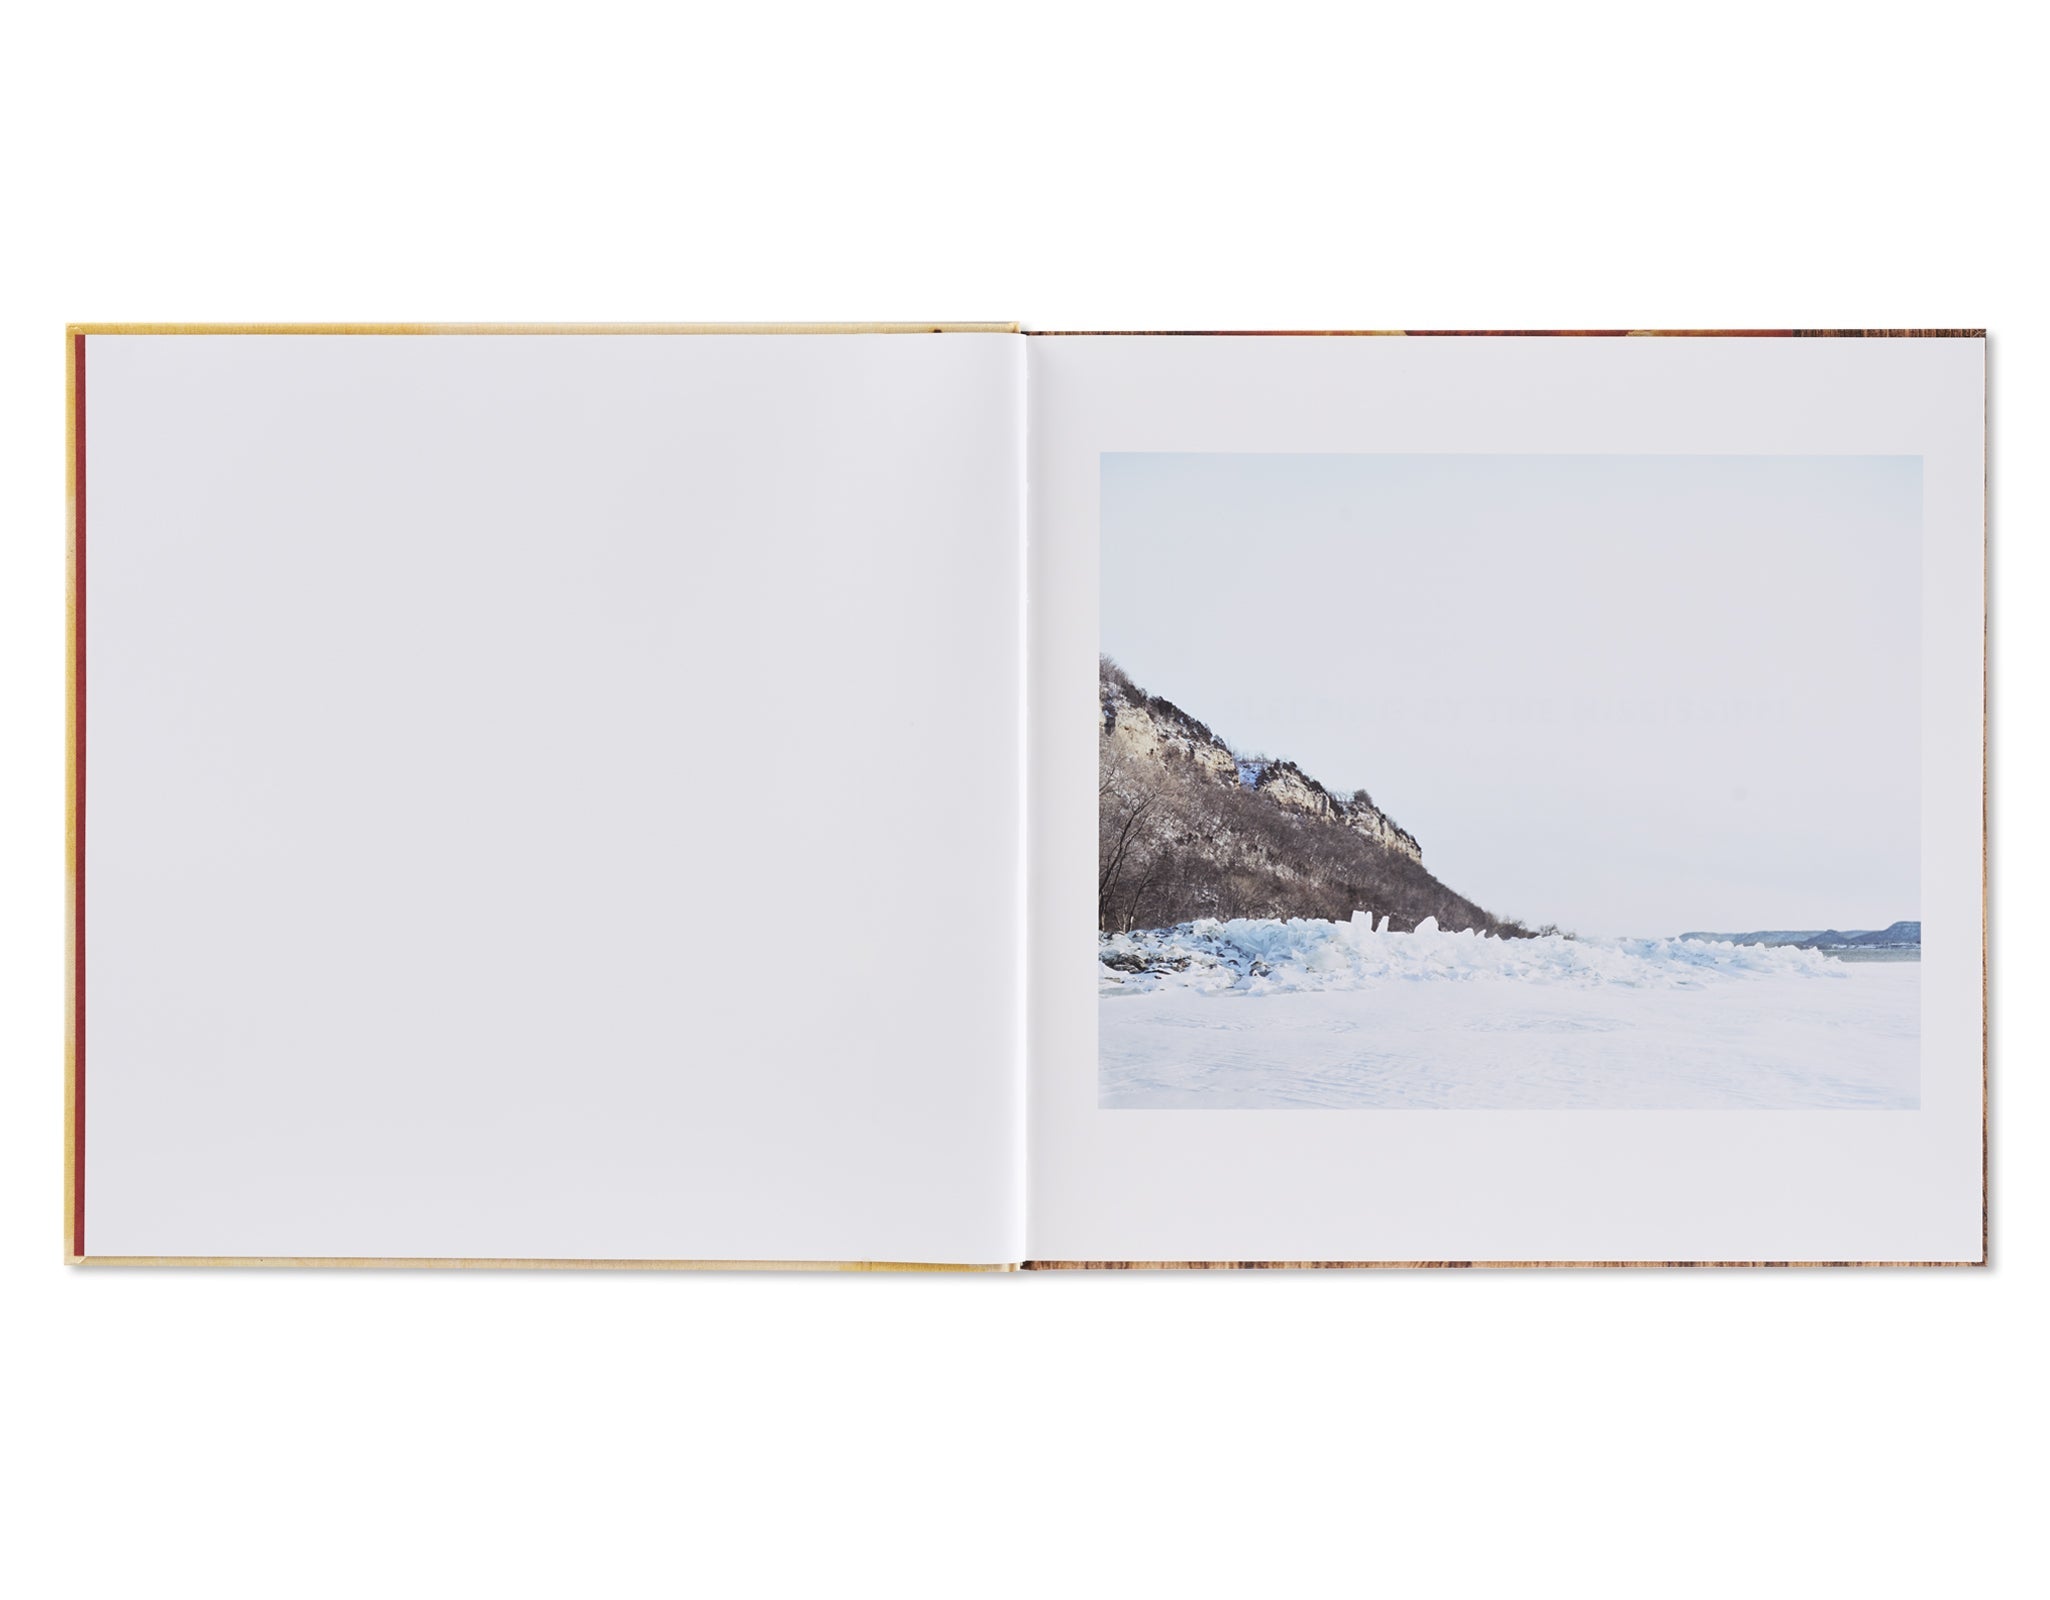 SLEEPING BY THE MISSISSIPPI by Alec Soth – twelvebooks